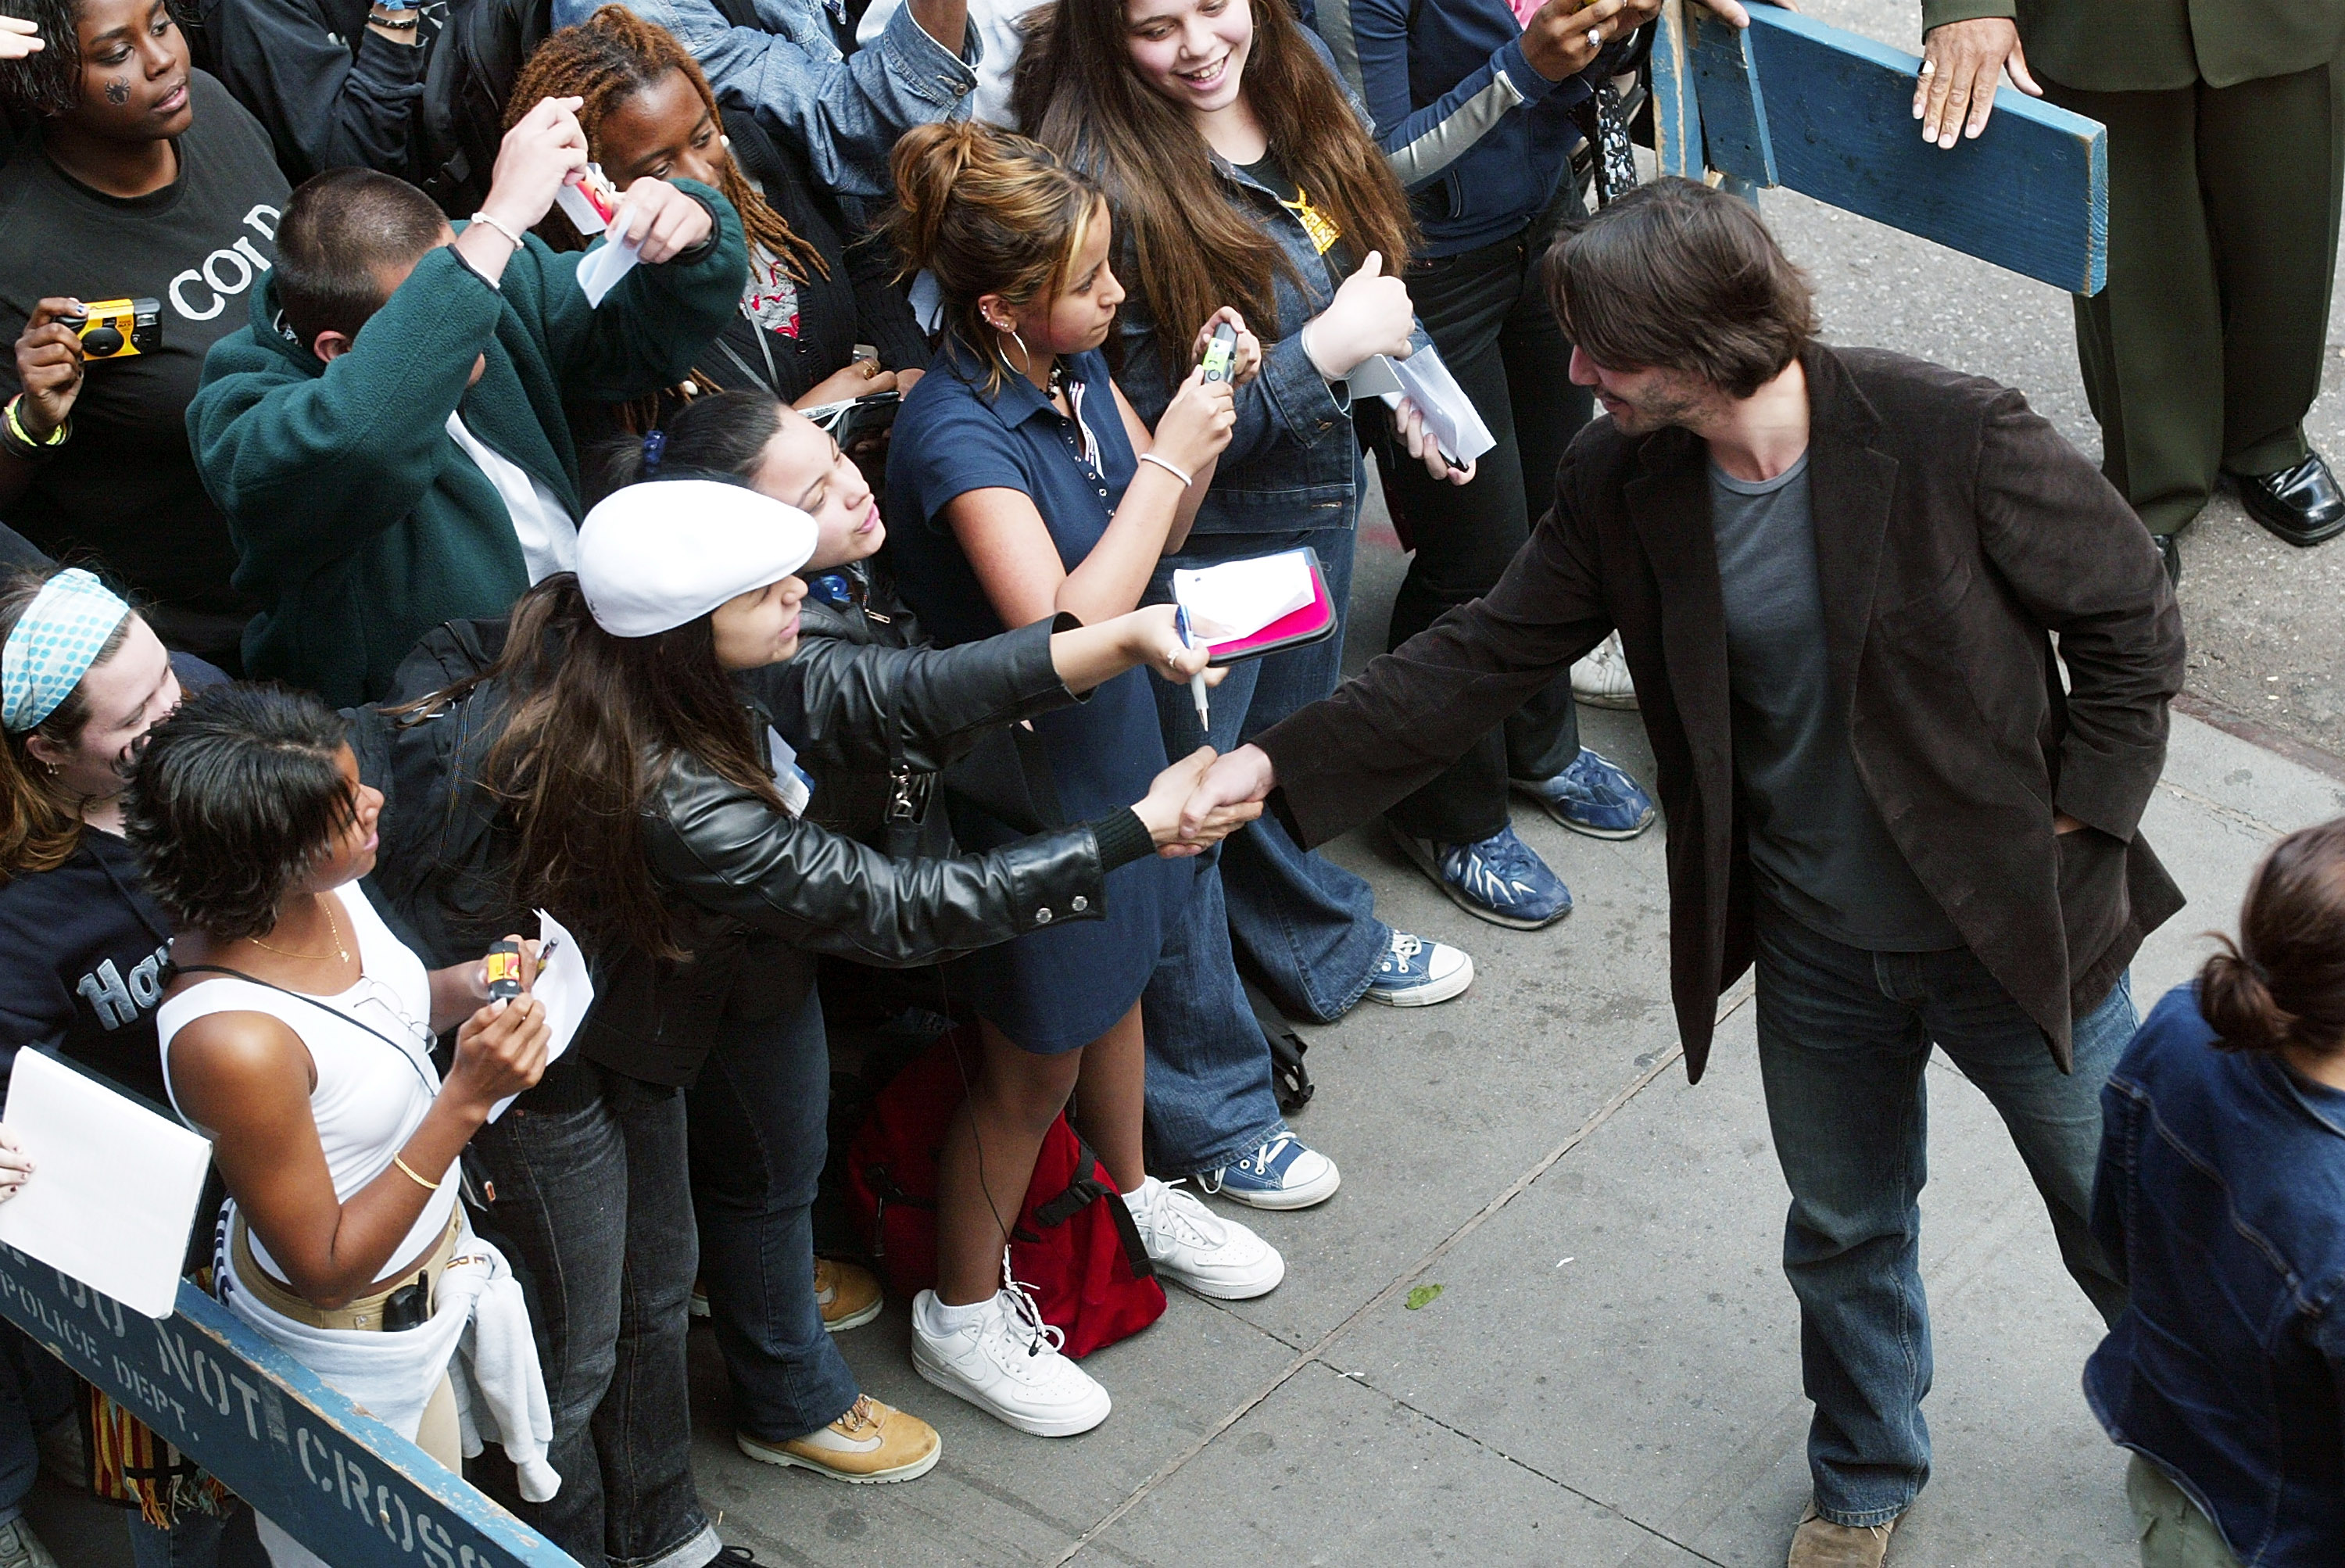 Keanu Reeves greets fans during a visit from the cast of "The Matrix Reloaded" in New York City, on May 13, 2003. | Source: Getty Images